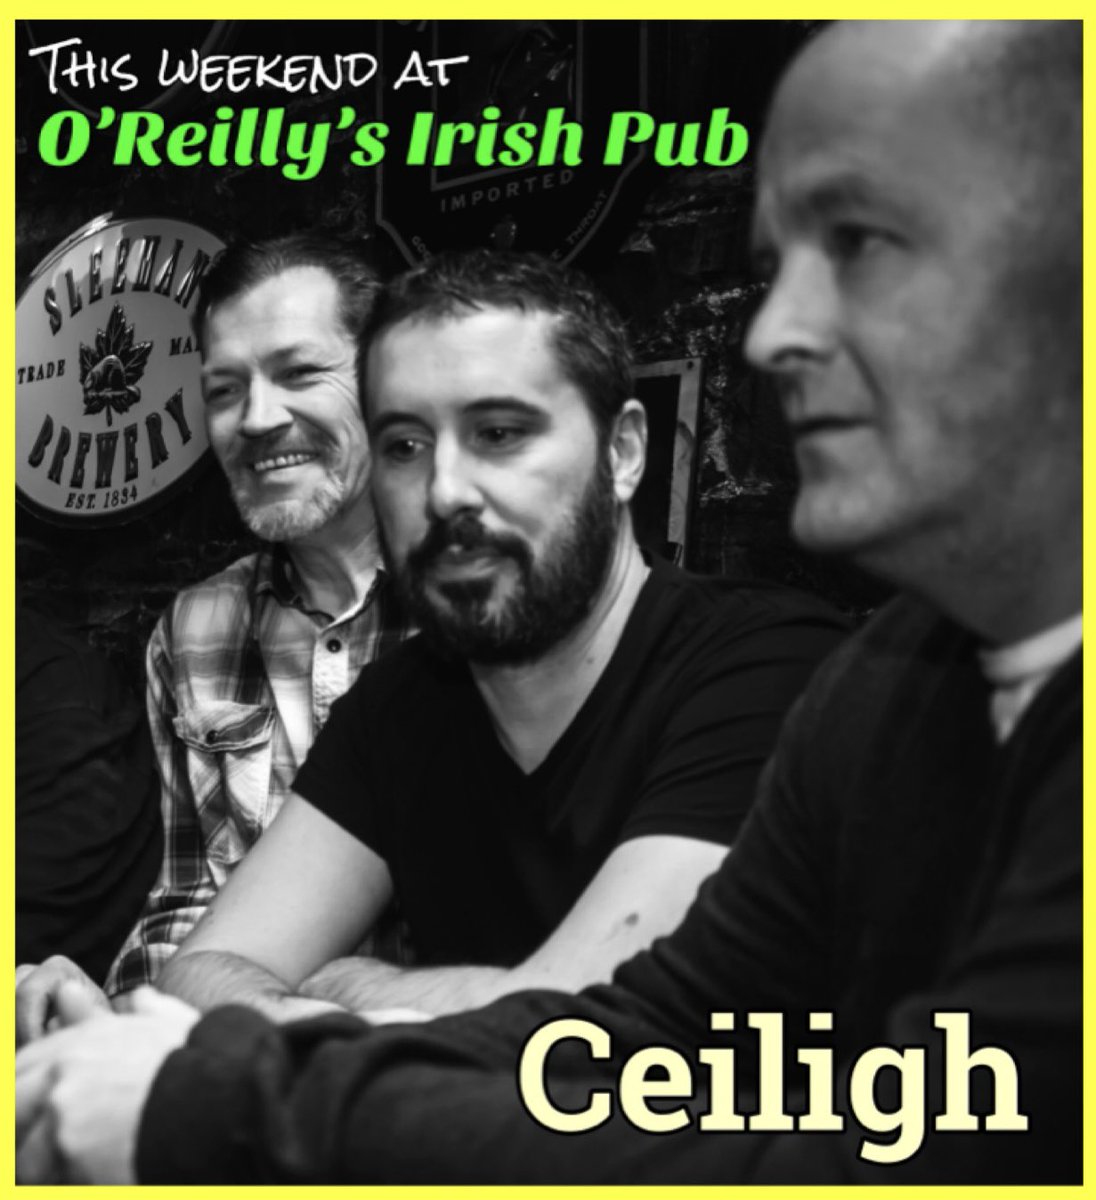 Last night was so much fun we decided to do it all again tonight @oreillys_pub Hope to see you there ✌️&❤️ @GeorgeStLive @DowntownStJohns @DestinationSJ